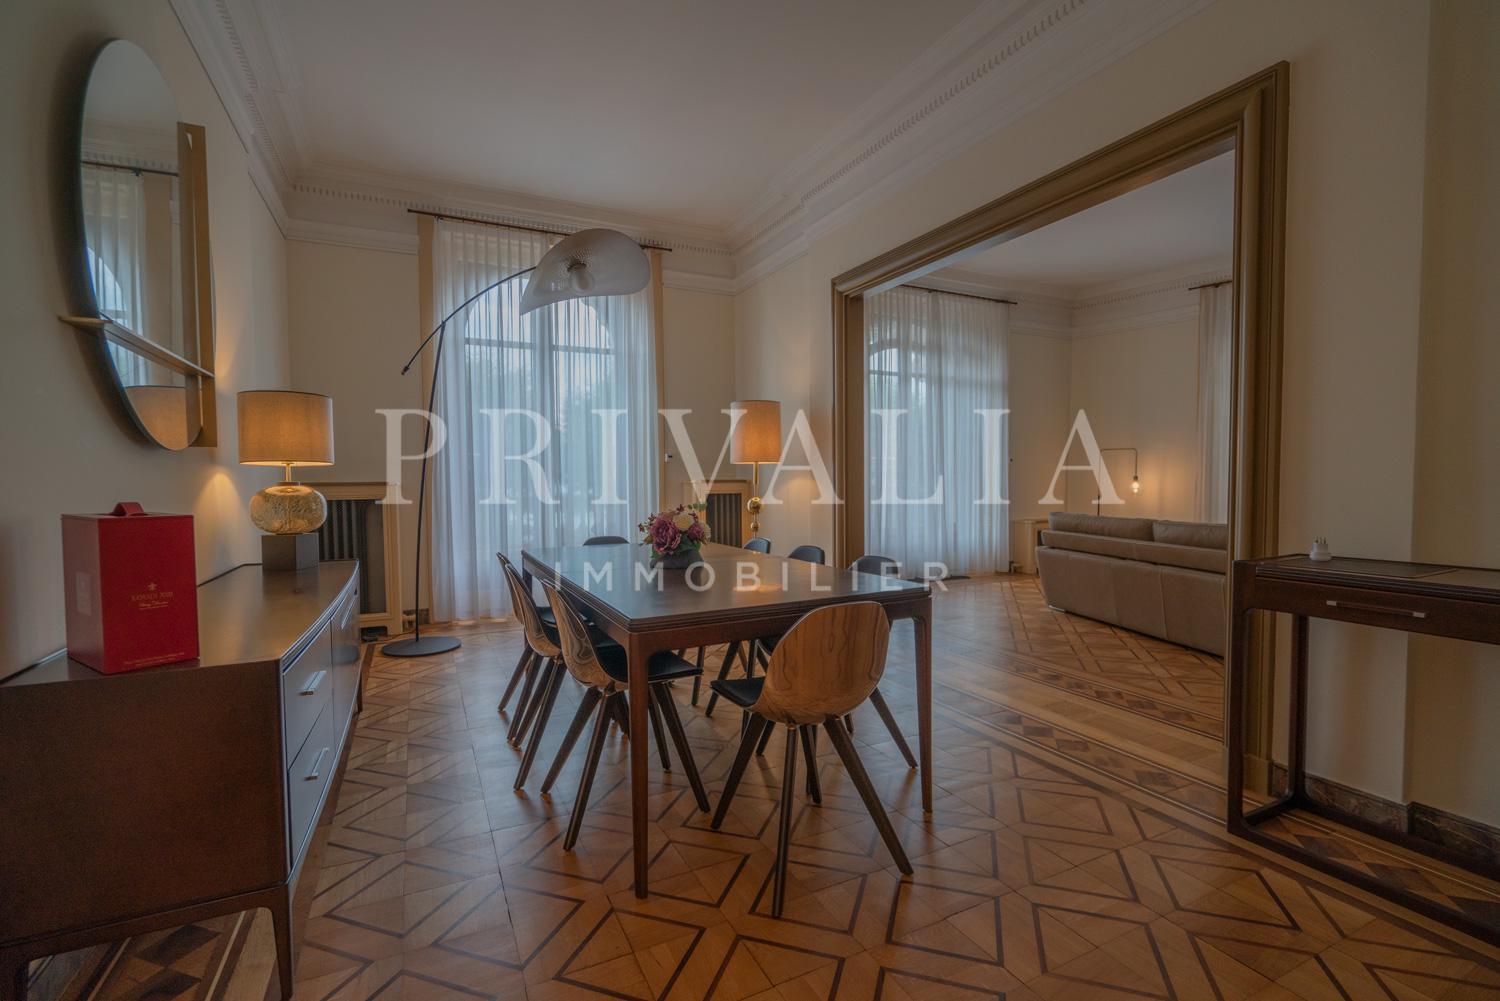 PrivaliaStunning apartment of 305 m2 located in a prestigious building on the lakefront